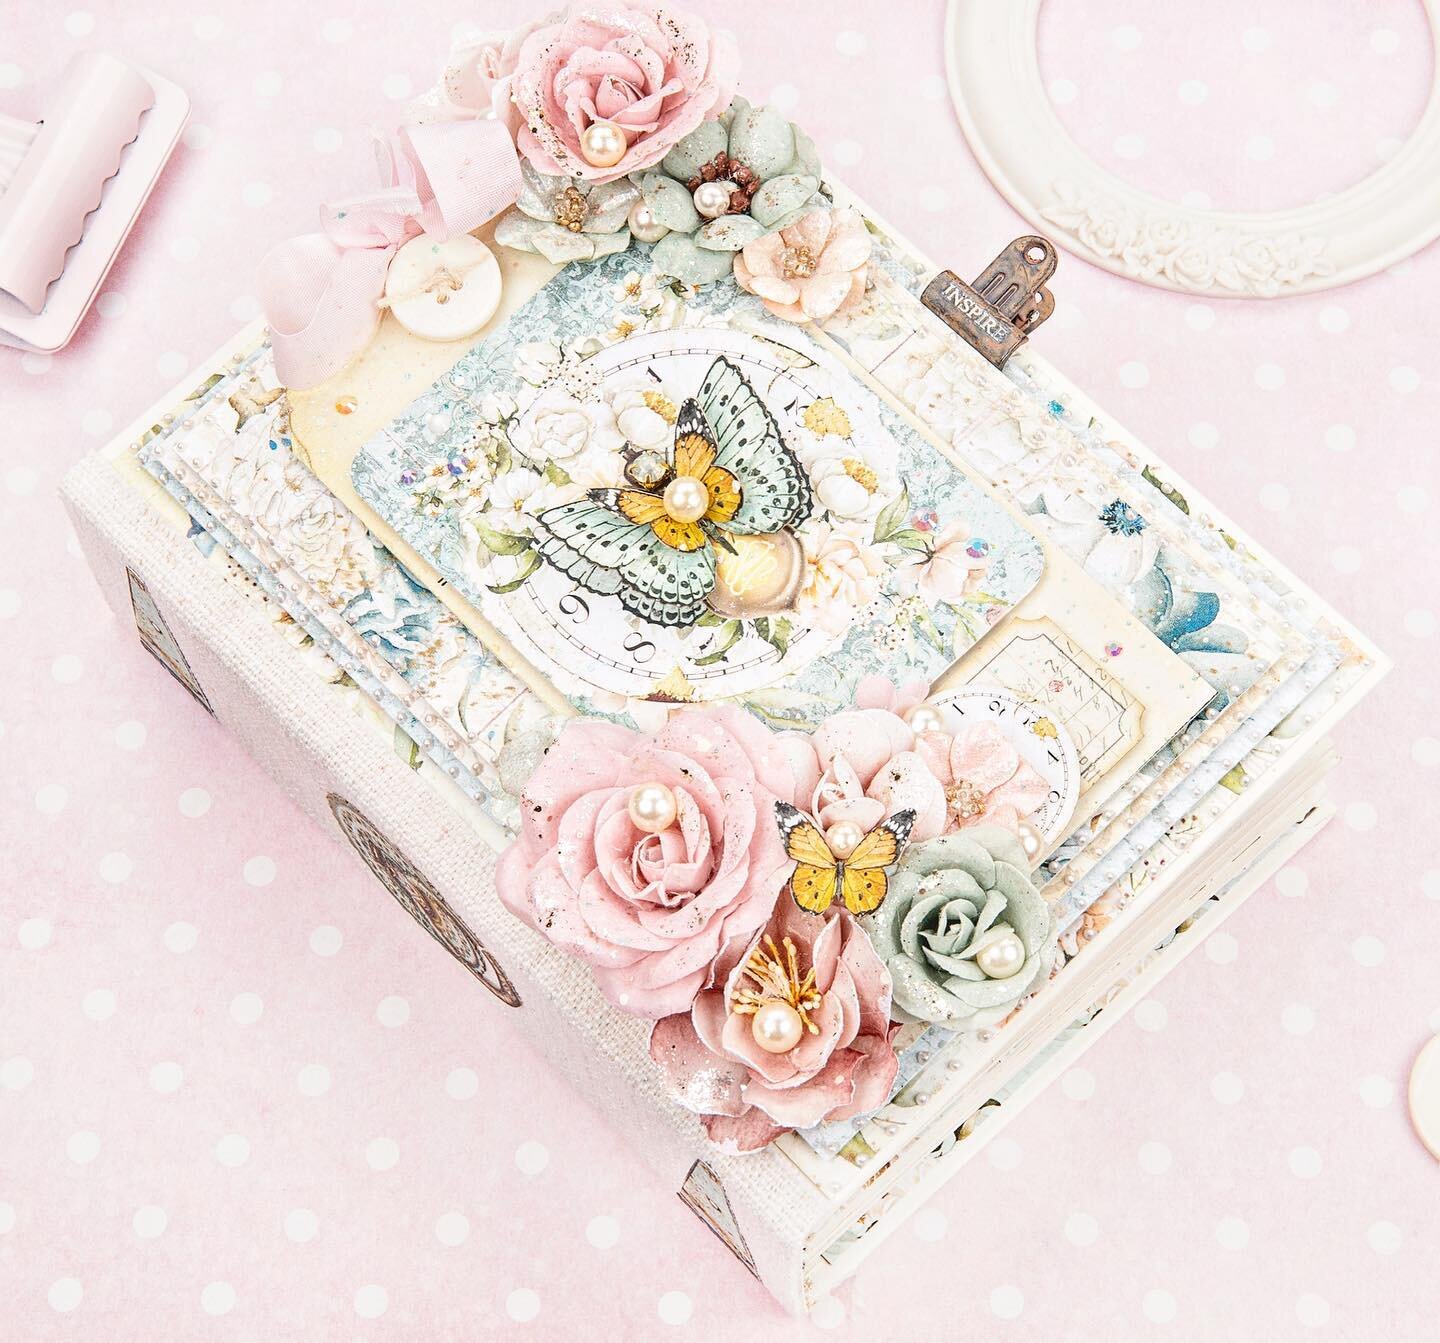 ✨happy friday✨ hope your weekend is filled with beautiful papers, flowers and only pretty things ✨🎀
-
#frankgarciastudio #frankgarciadesigns #onlyprettythings #minialbum #memoryhardware #shabbychic #primaflowers